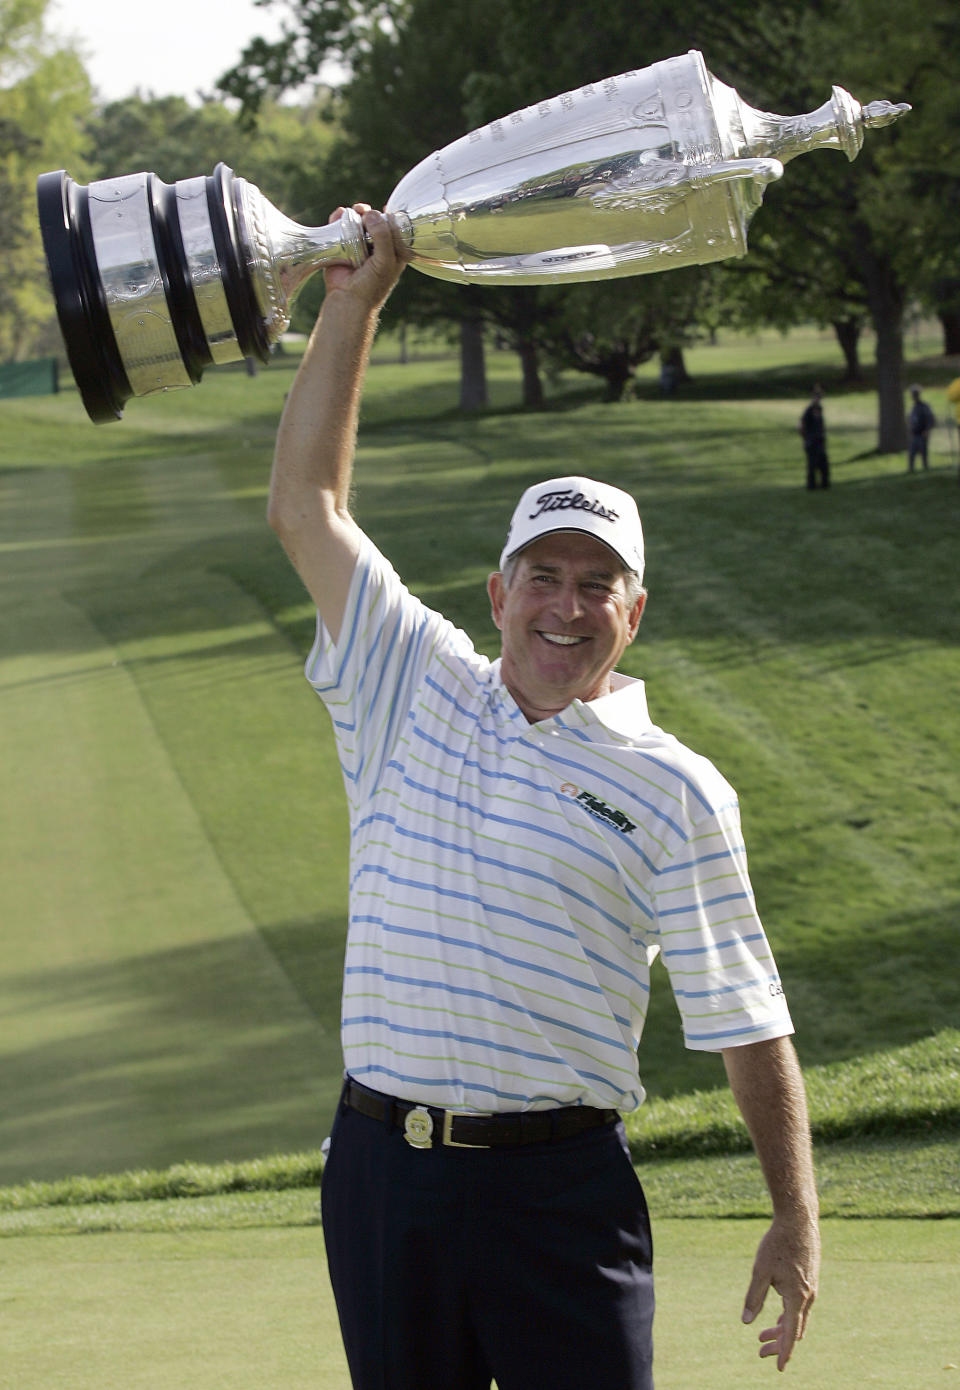 FILE - In this May 25, 2008, file photo, Jay Haas holds up the trophy and celebrates winning the Senior PGA Championship golf tournament at Oak Hill Country Club in Rochester, N.Y. It didn't take long for Haas to be reminded of how gusting winds can play havoc on those making their way around Oak Hill Country Club's East Course. "Got here on Sunday night and played nine holes Monday, and it was blowing, what, 25, 30 (miles per hour)," Haas recalled with a laugh Wednesday, May 22, 2019, a day before the Senior PGA Championship opens. (AP Photo/David Duprey, File)